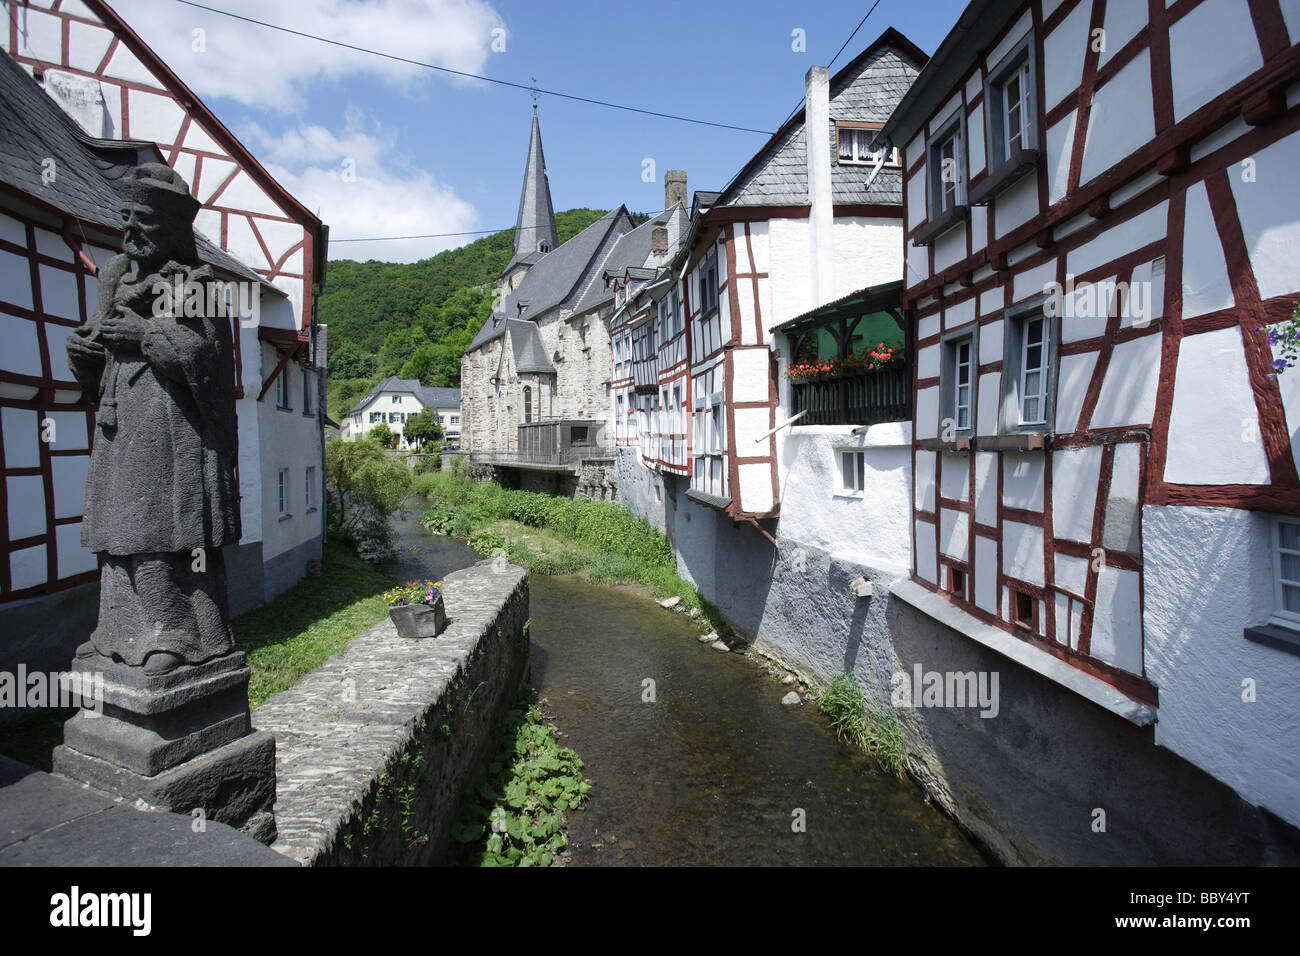 Half-timbered houses in the village of Monreal, Mayen-Koblenz district, Rhineland-Palatinate, Germany, Europe Stock Photo